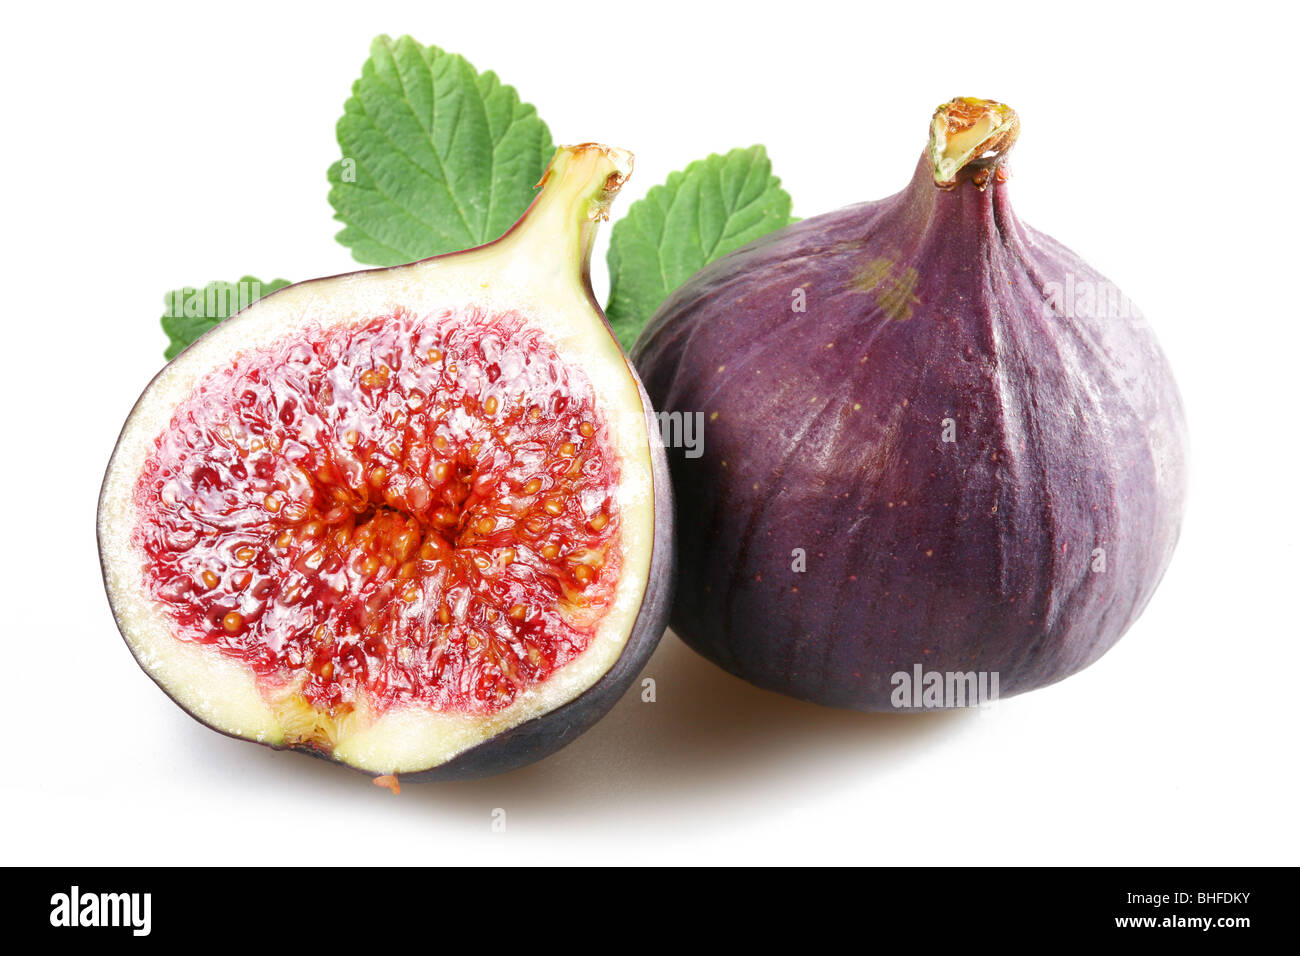 Figs with cut fruit and leaves on a white background Stock Photo